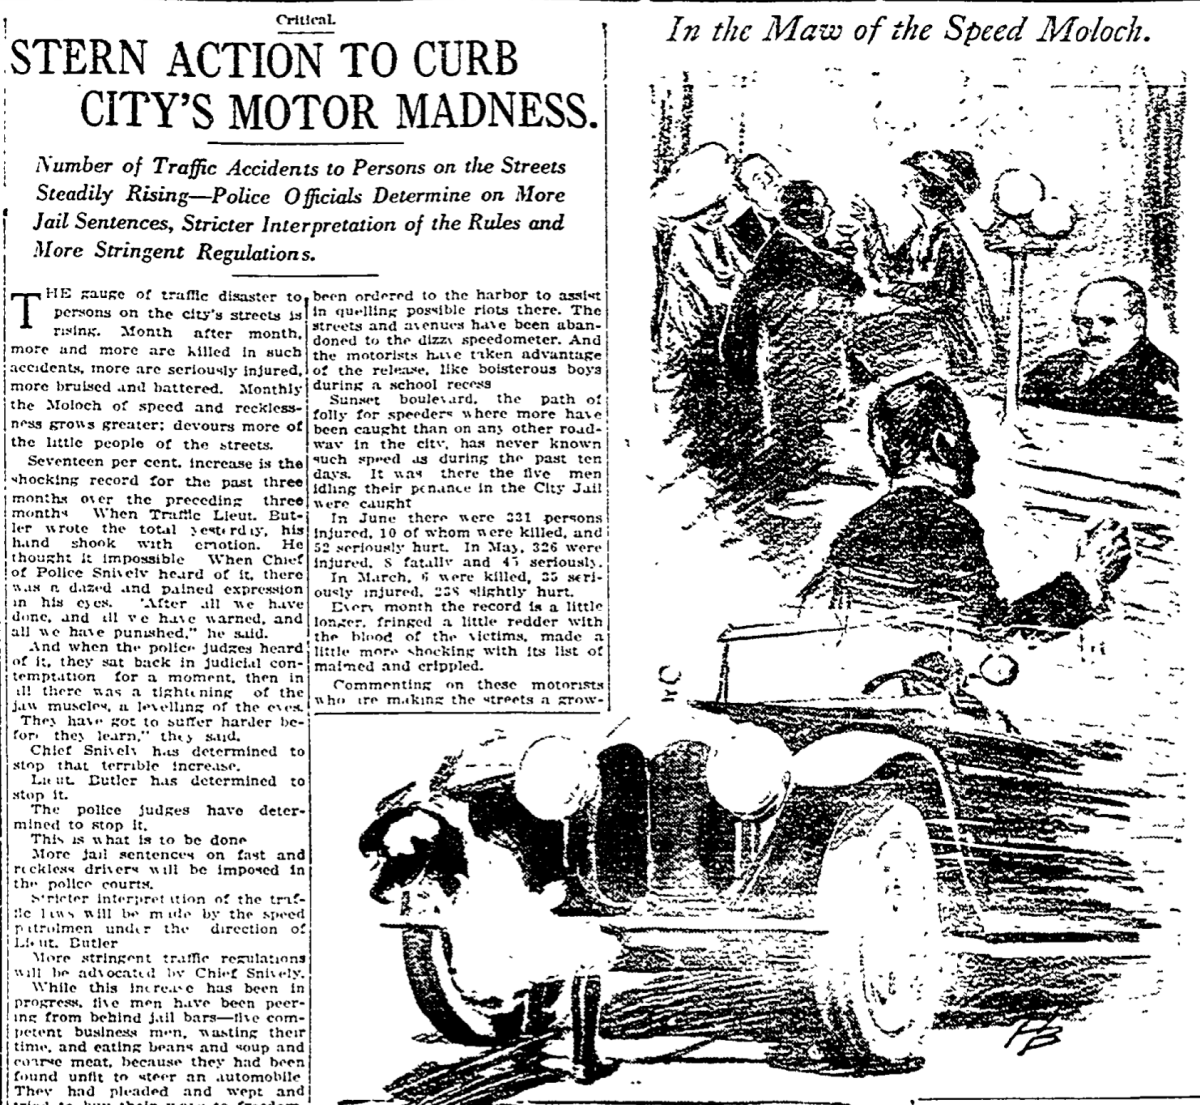 A 1916 Times article decried safety conditions, saying innocent Angelenos were caught “in the maw of the Speed Moloch."